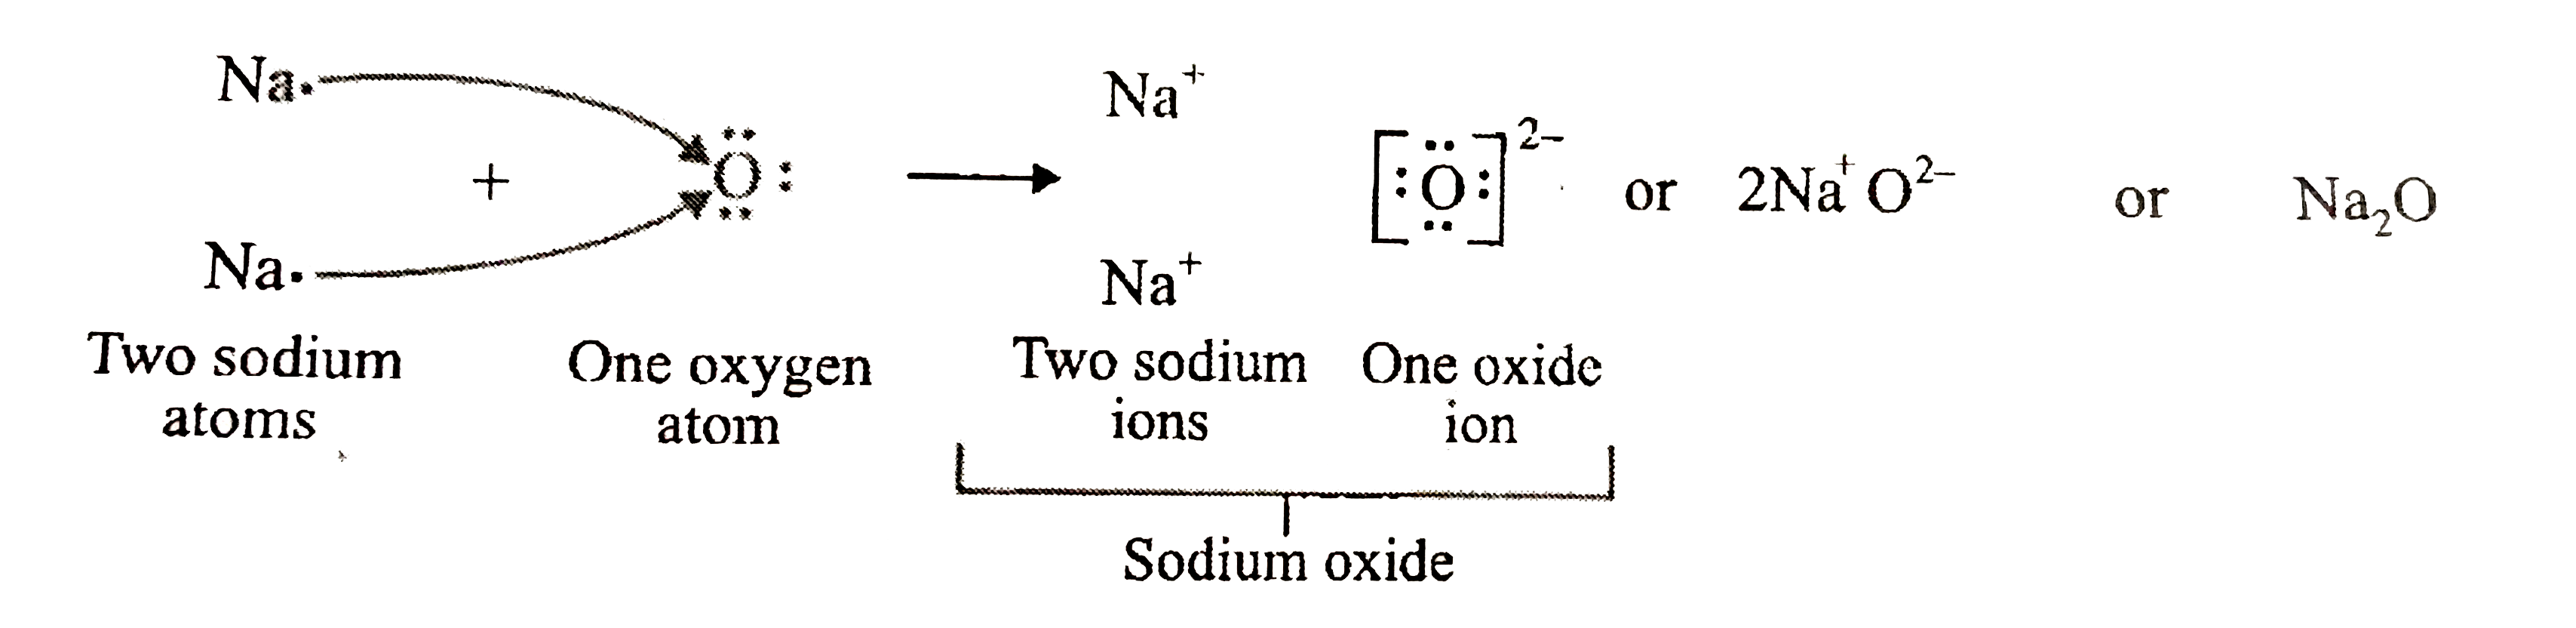 magnesium ion lewis dot structure